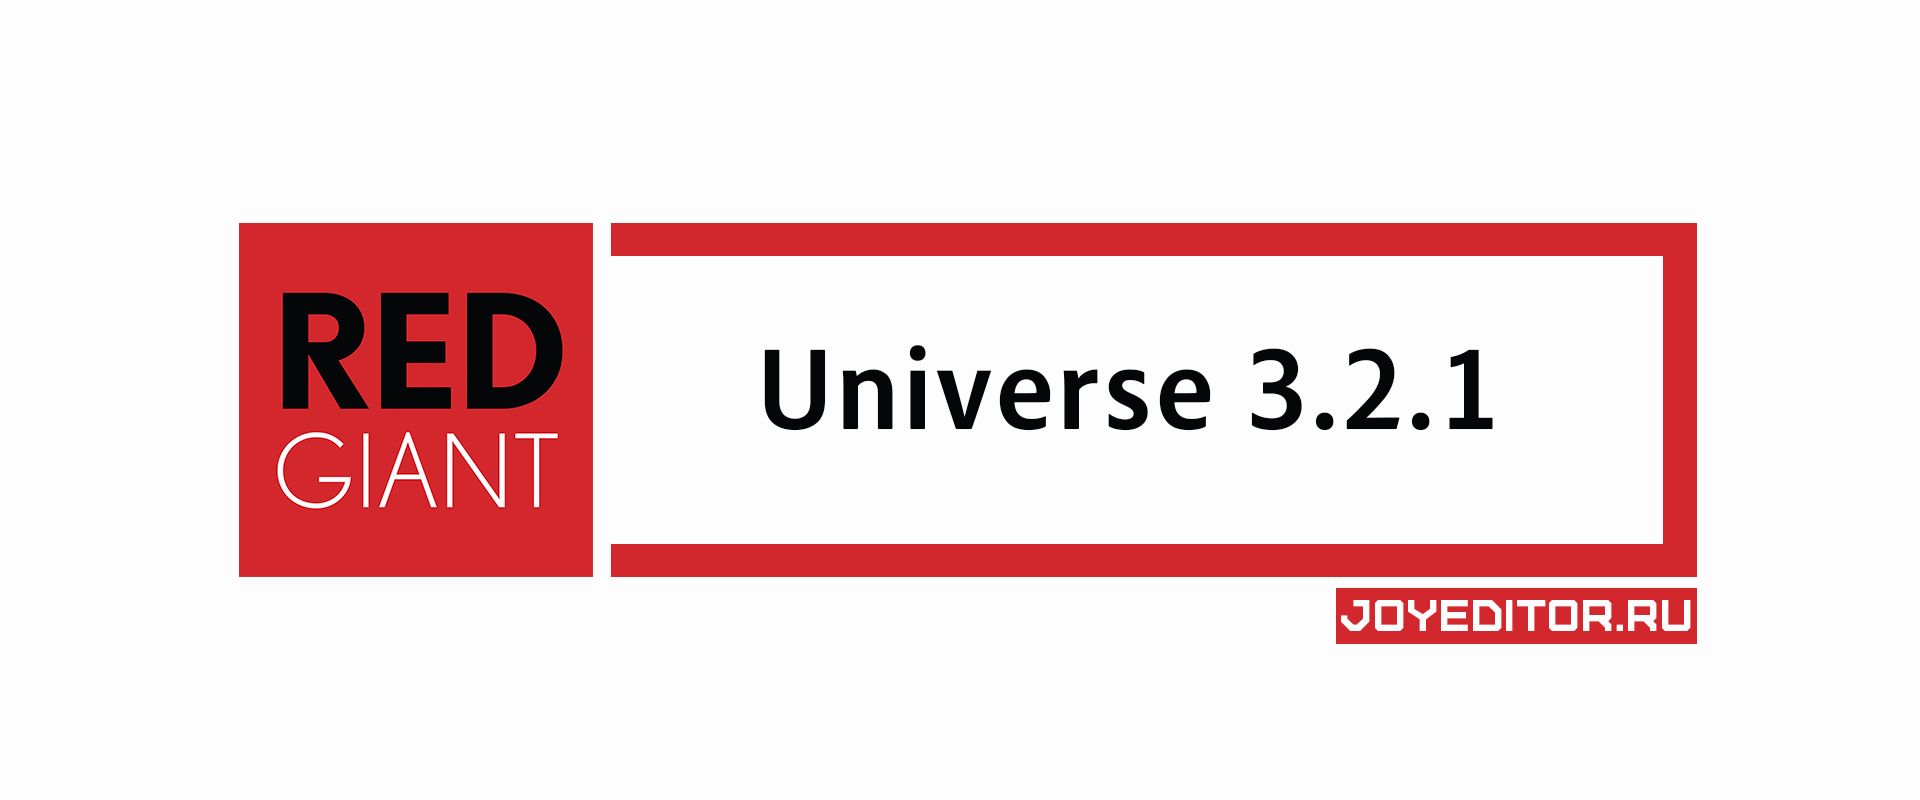 Red Giant - Universe 3.2.1